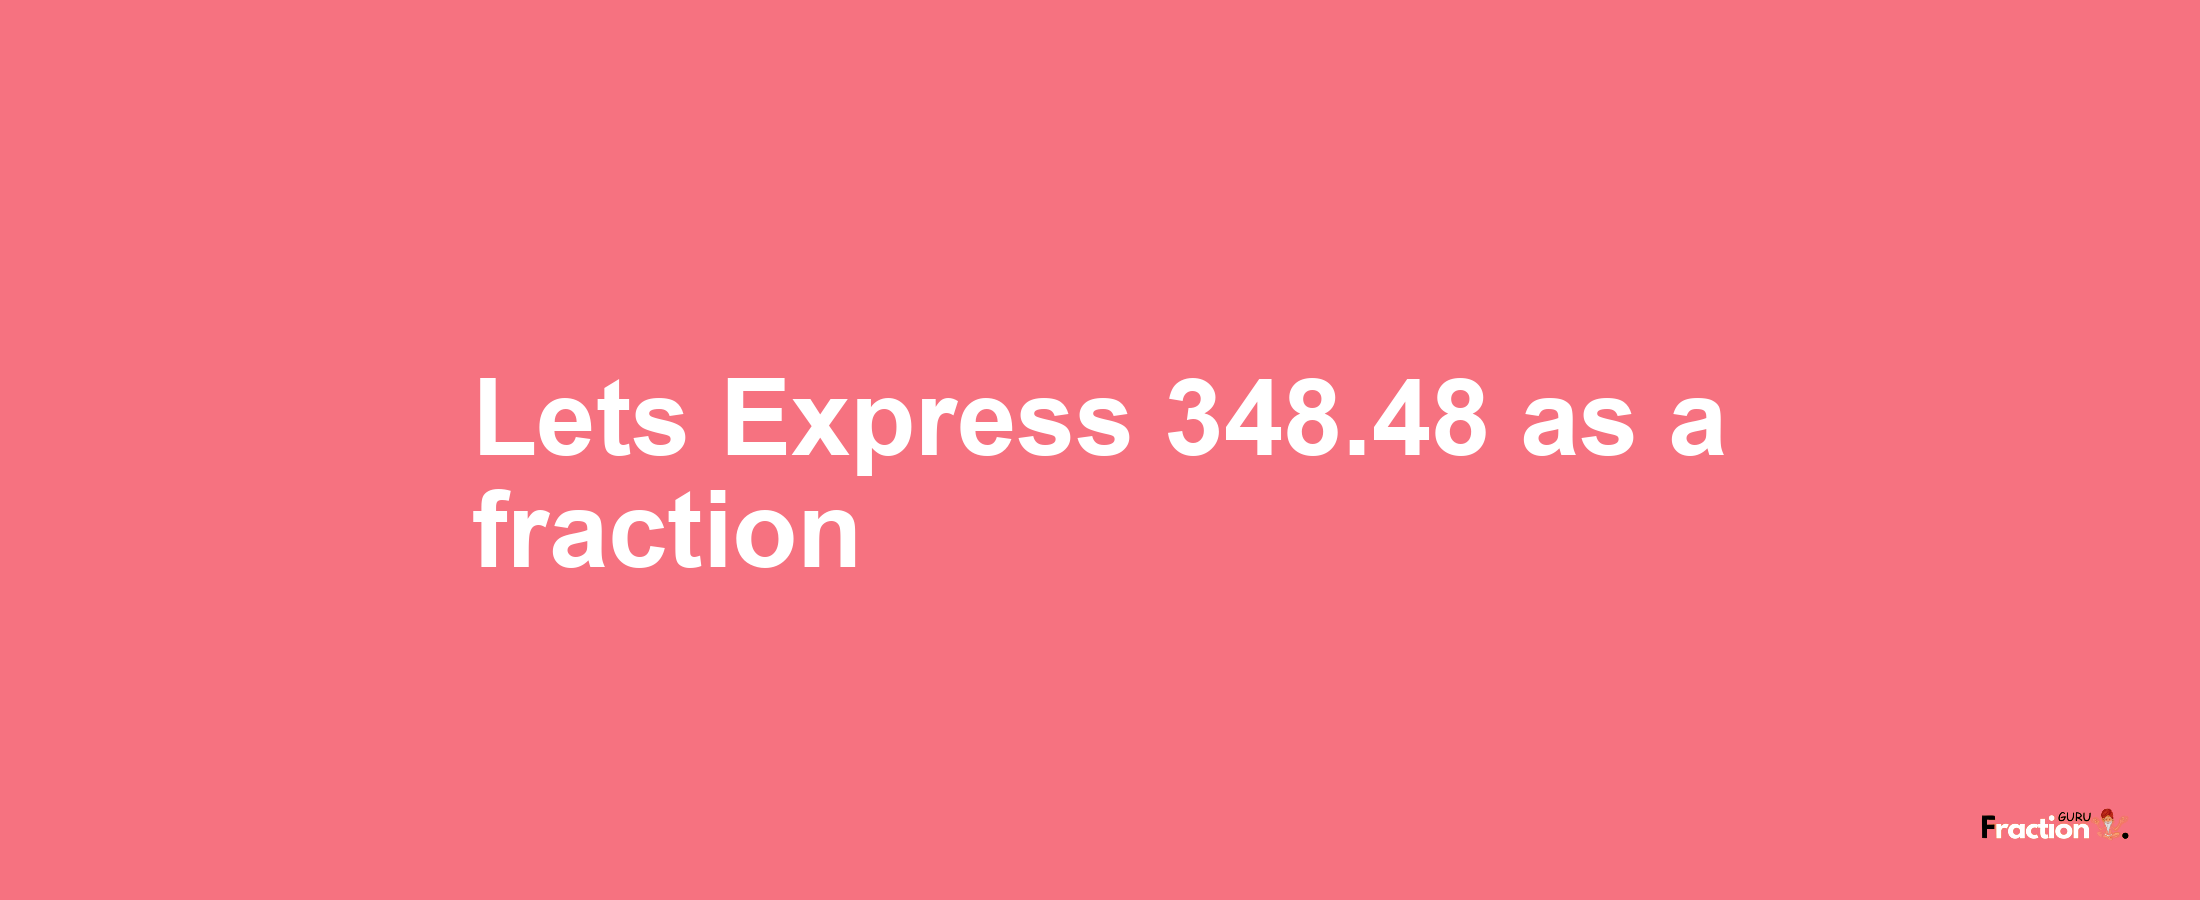 Lets Express 348.48 as afraction